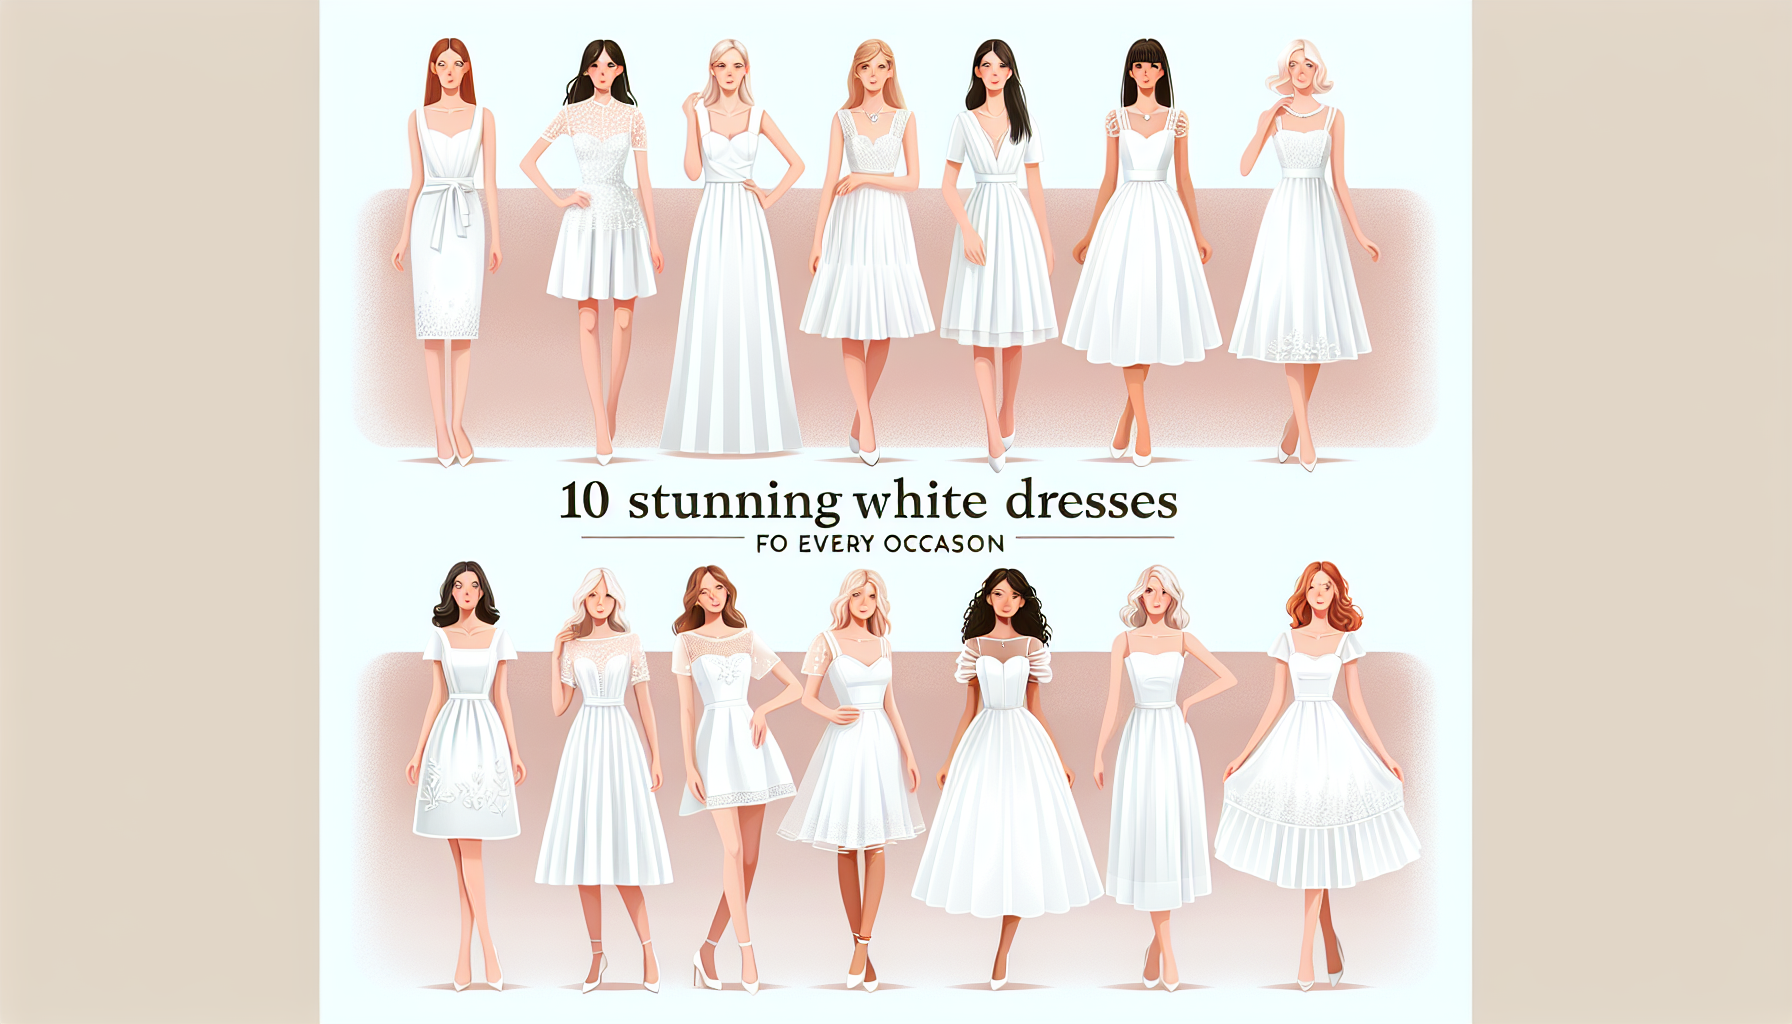 10 stunning white dresses for every occasion